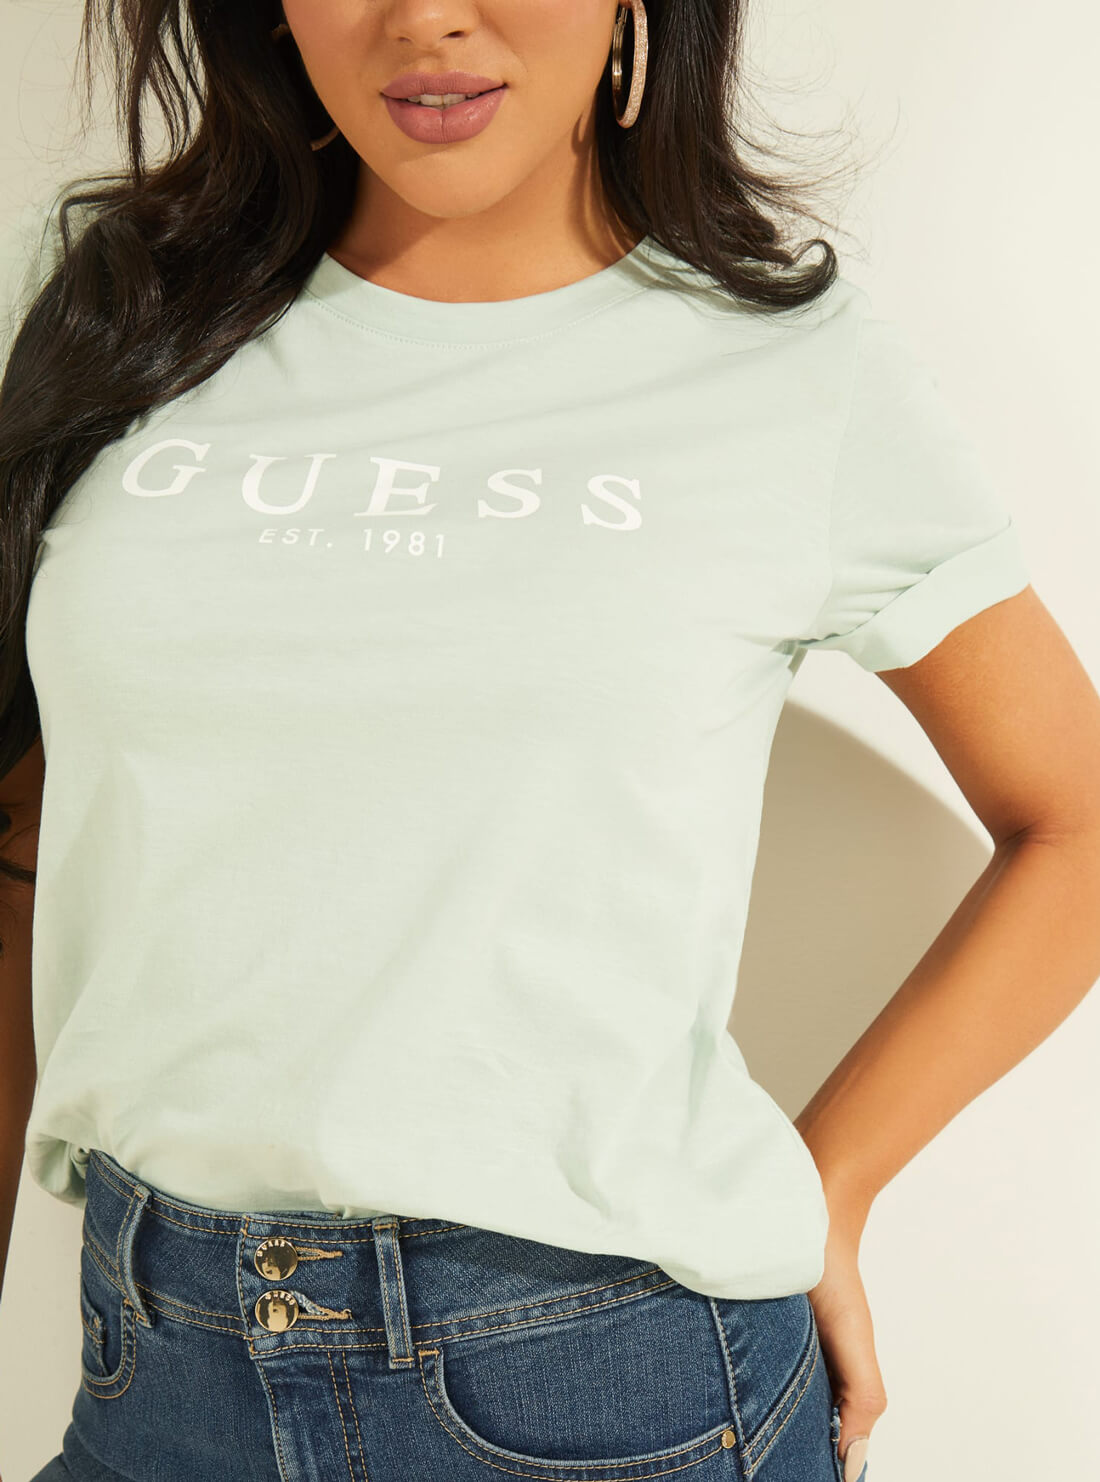 GUESS Womens Eco Light Teal Short Sleeve GUESS 1981 Rolled Cuff T-Shirt W0GI69R8G01 Detail View